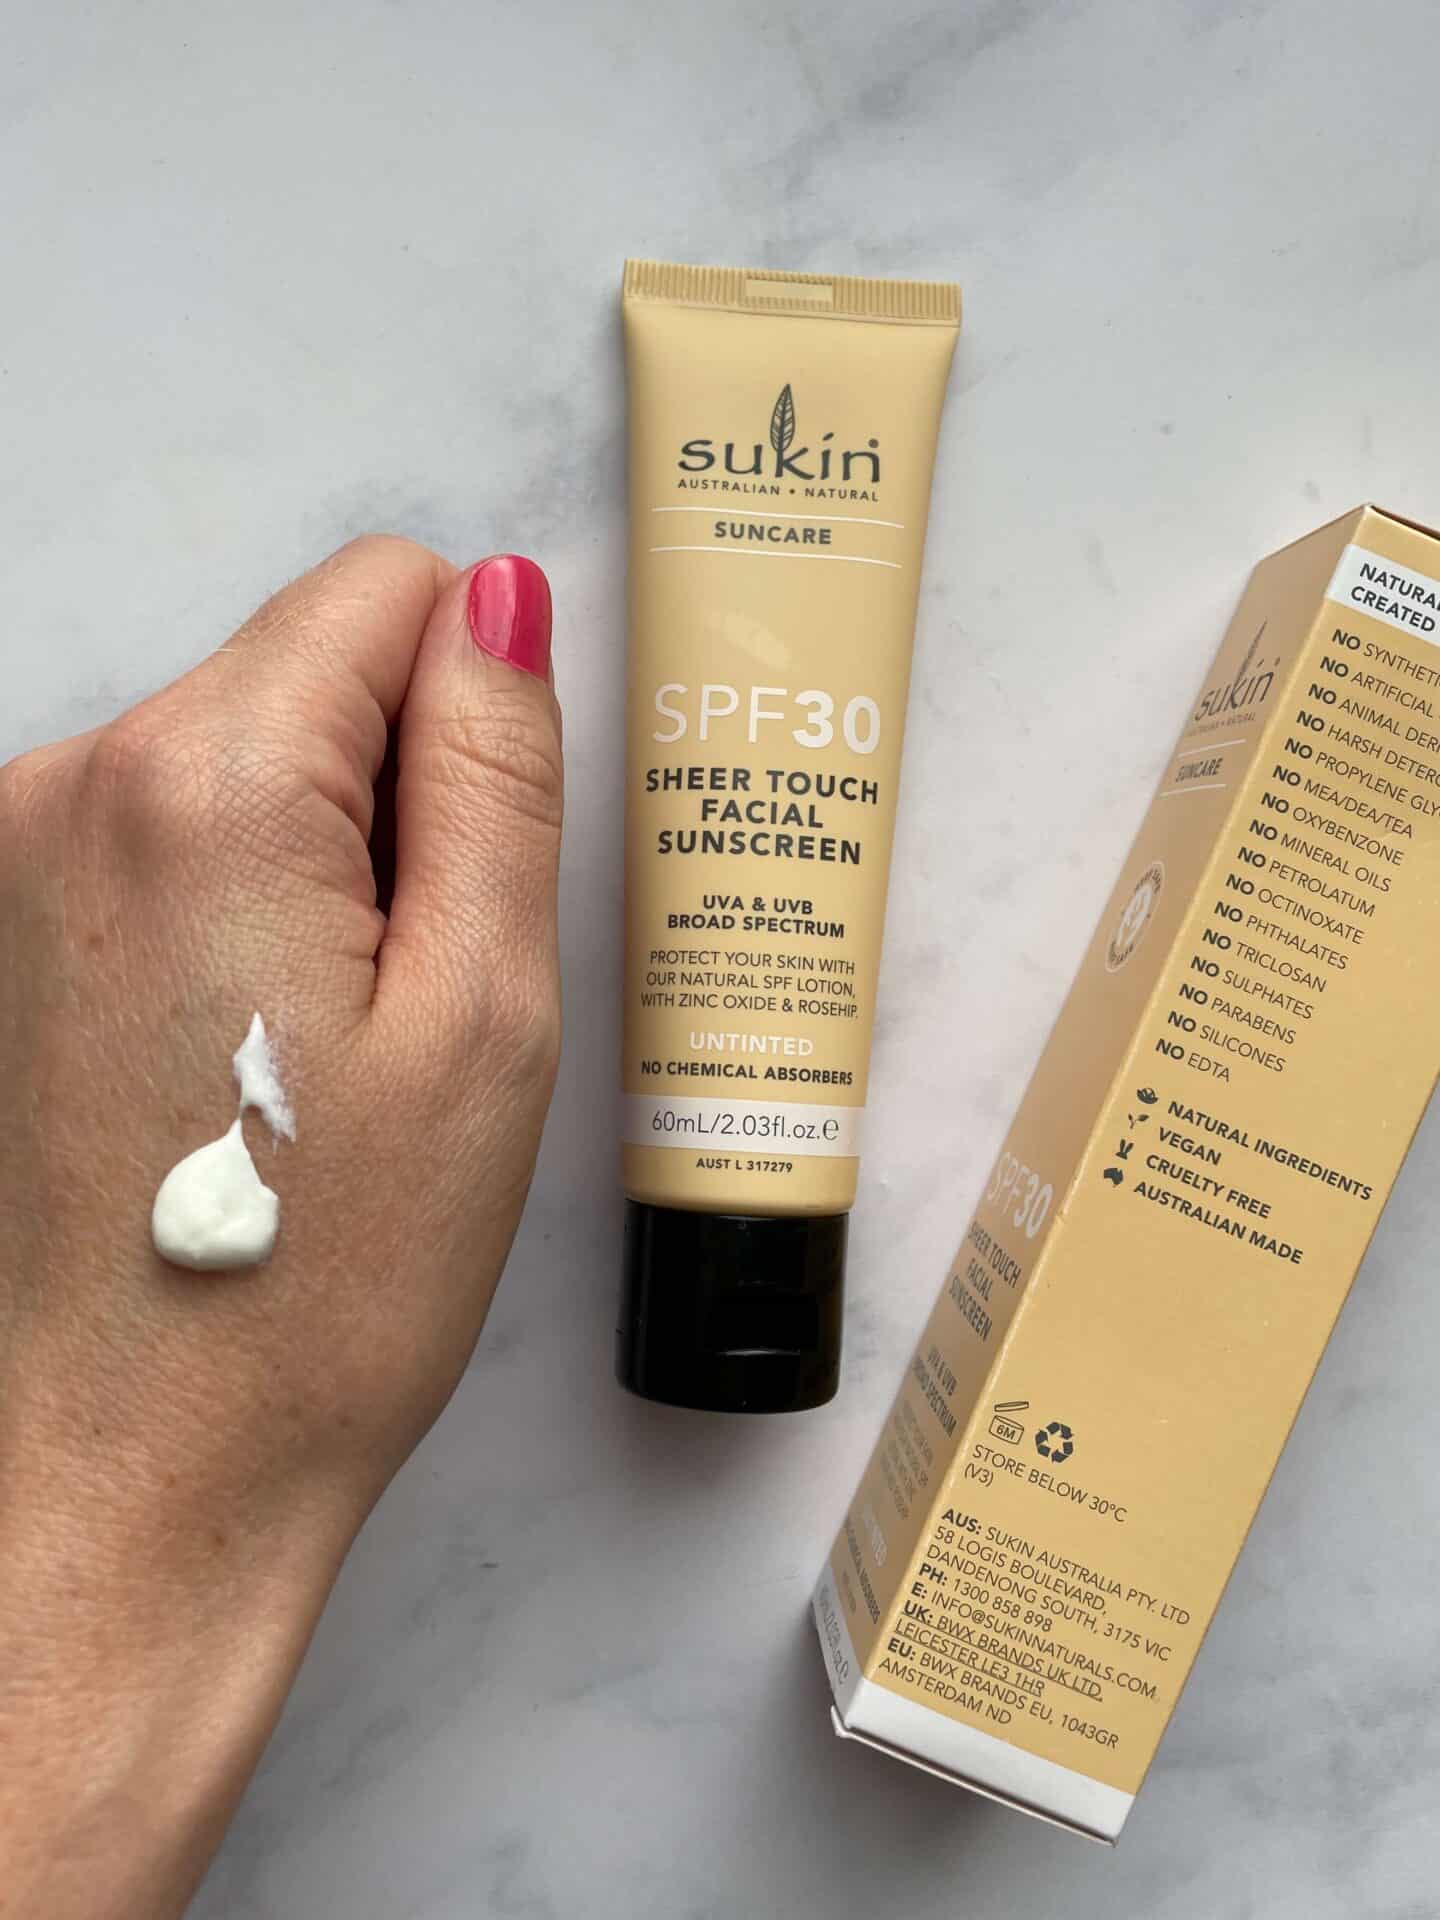 Sukin SPF30 Sheer Touch Tinted Sunscreen in Untinted swatch on hand 1440x1920 1